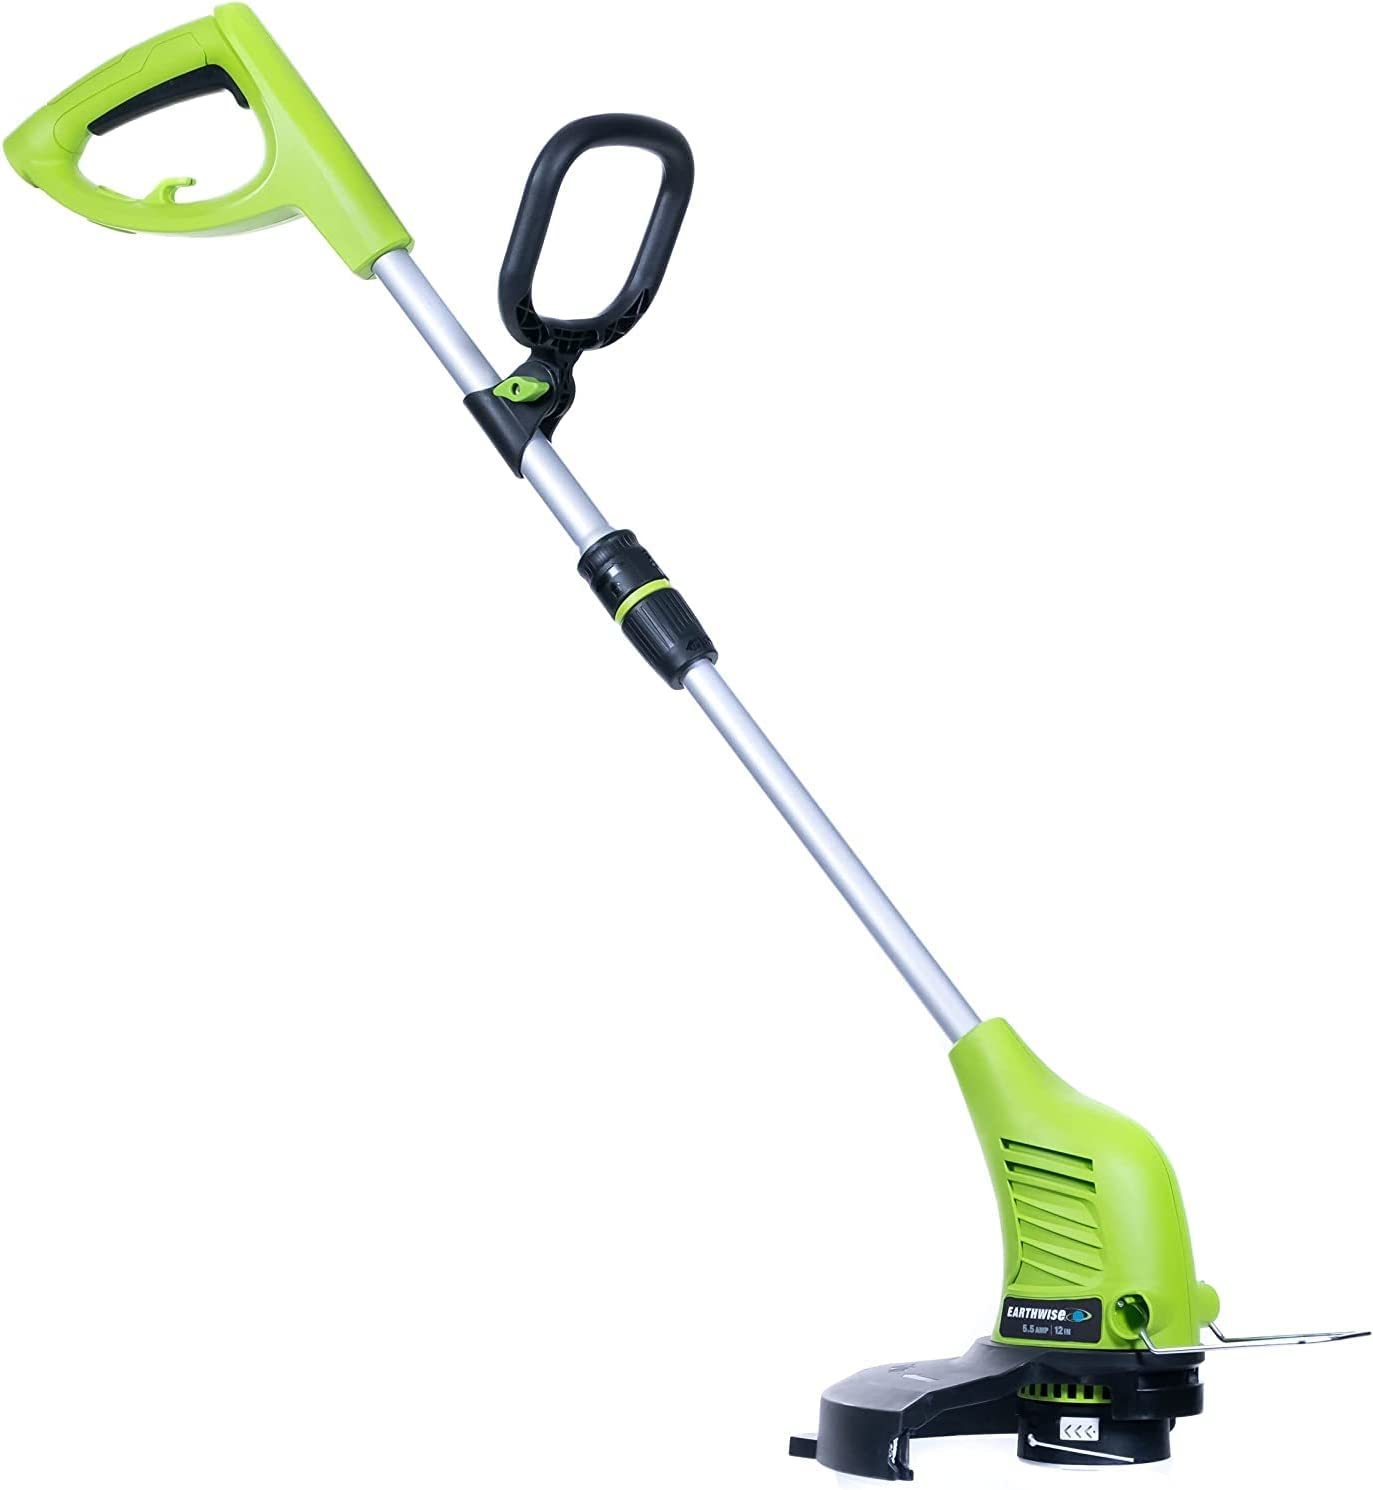 12-Inch 5.5-Amp Corded Electric String Trimmer, Green, From Earthwise Power - $77.98